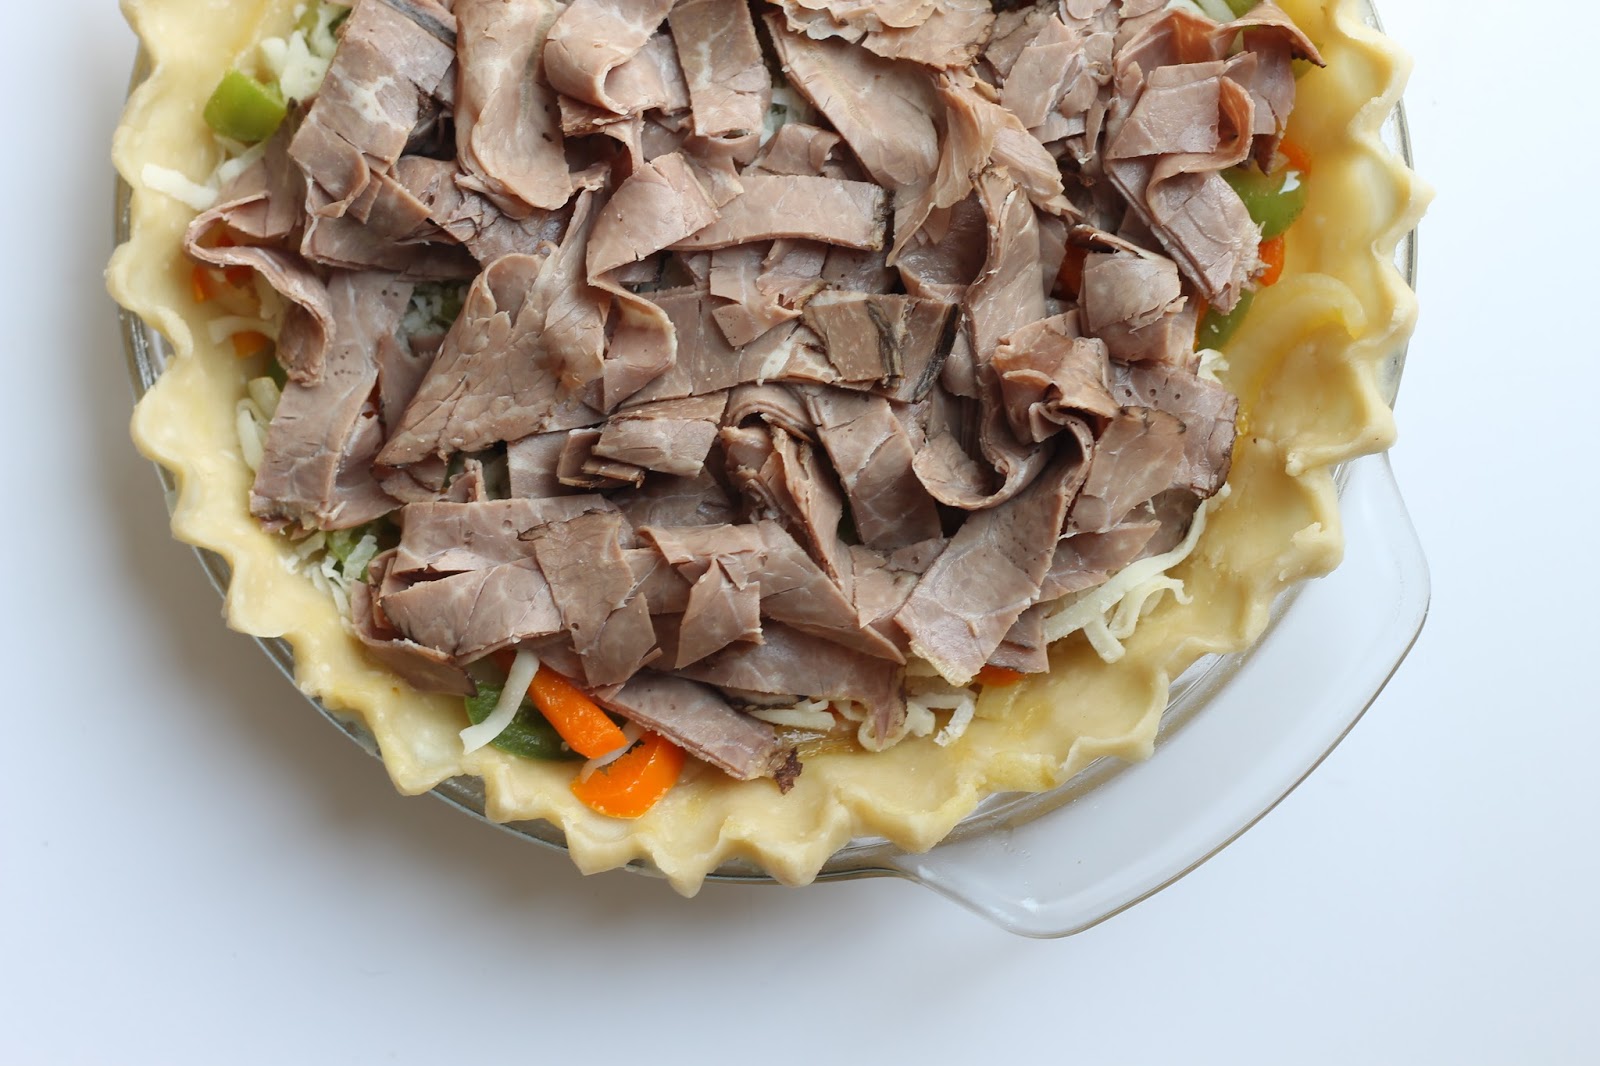 Where Your Treasure Is: Philly Cheese Steak Pie